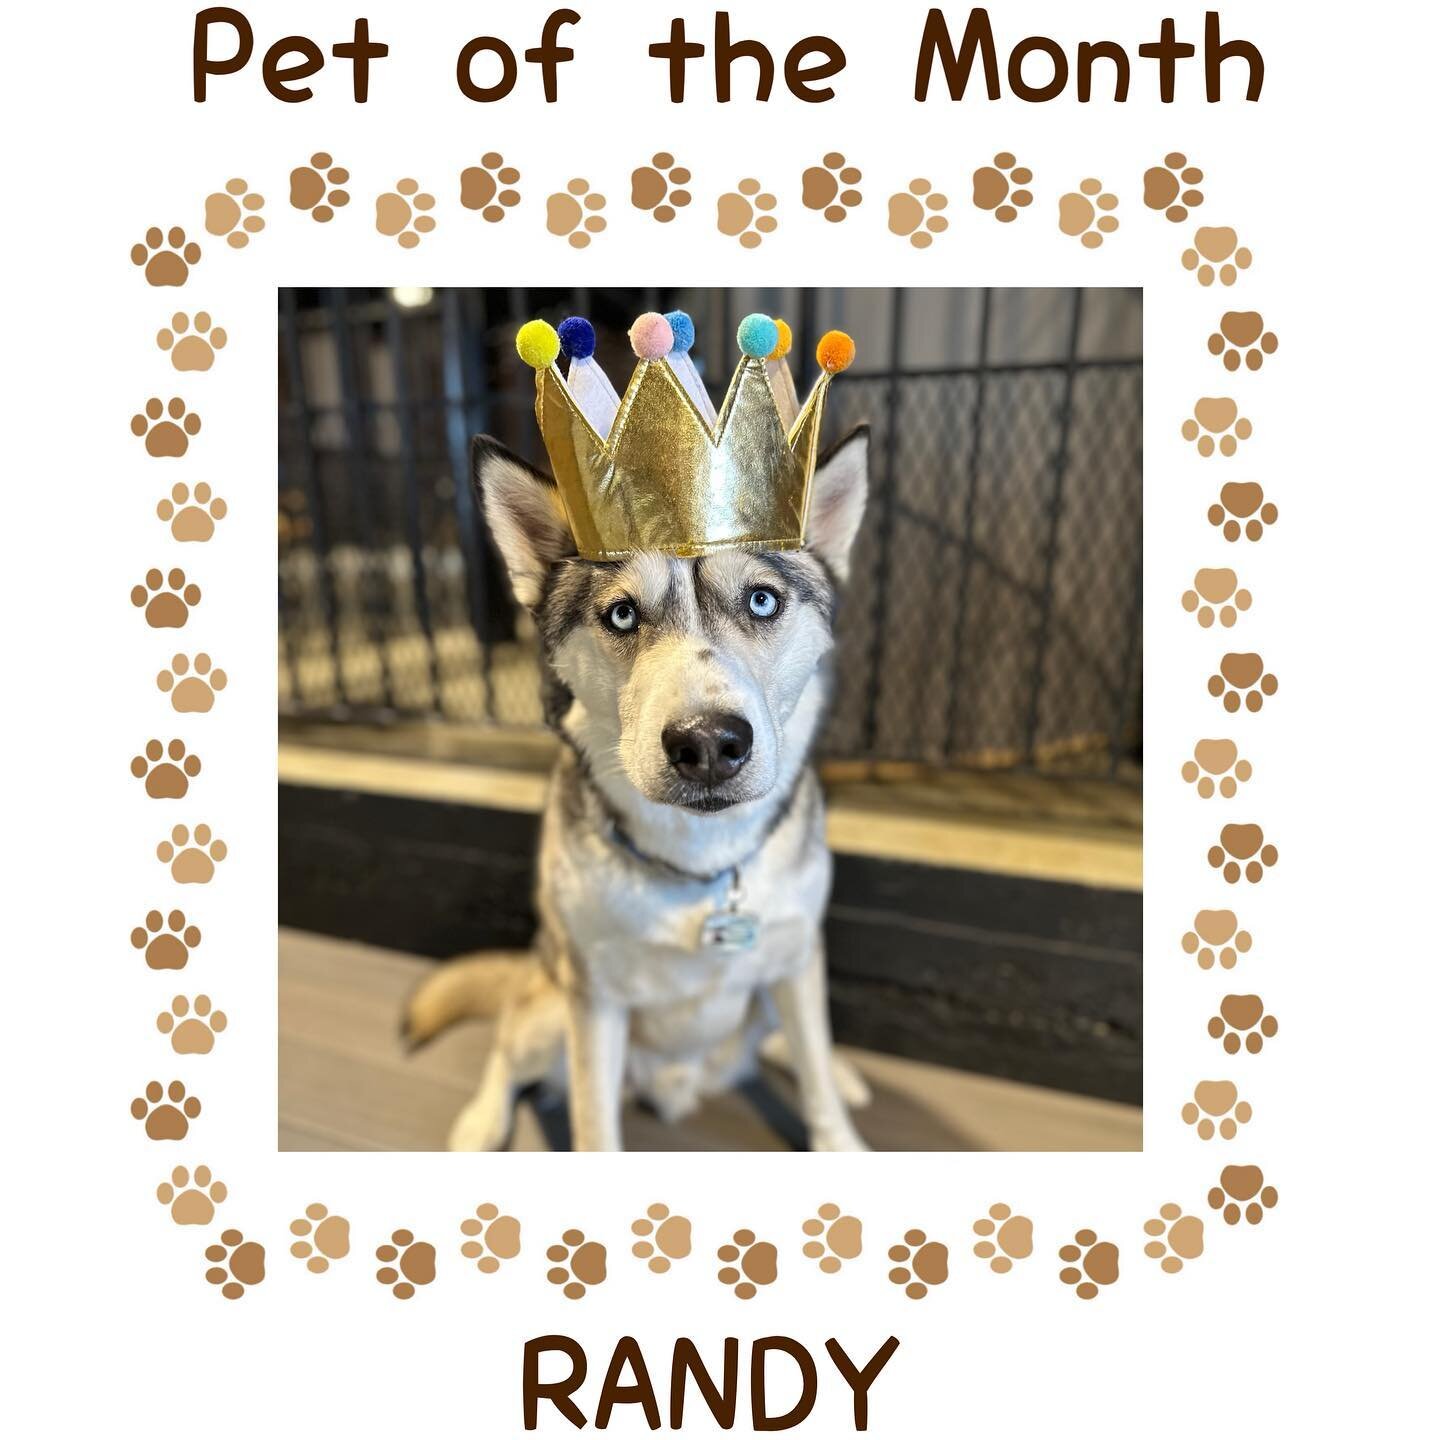 We would like to introduce a new segment and announce Randy as our March &ldquo;pet of the month&rdquo;!

Randy has been a frequent flyer here at Park-9 doggie daycare since end of October 2023. 
He&rsquo;s your typical husky; loves being outside in 